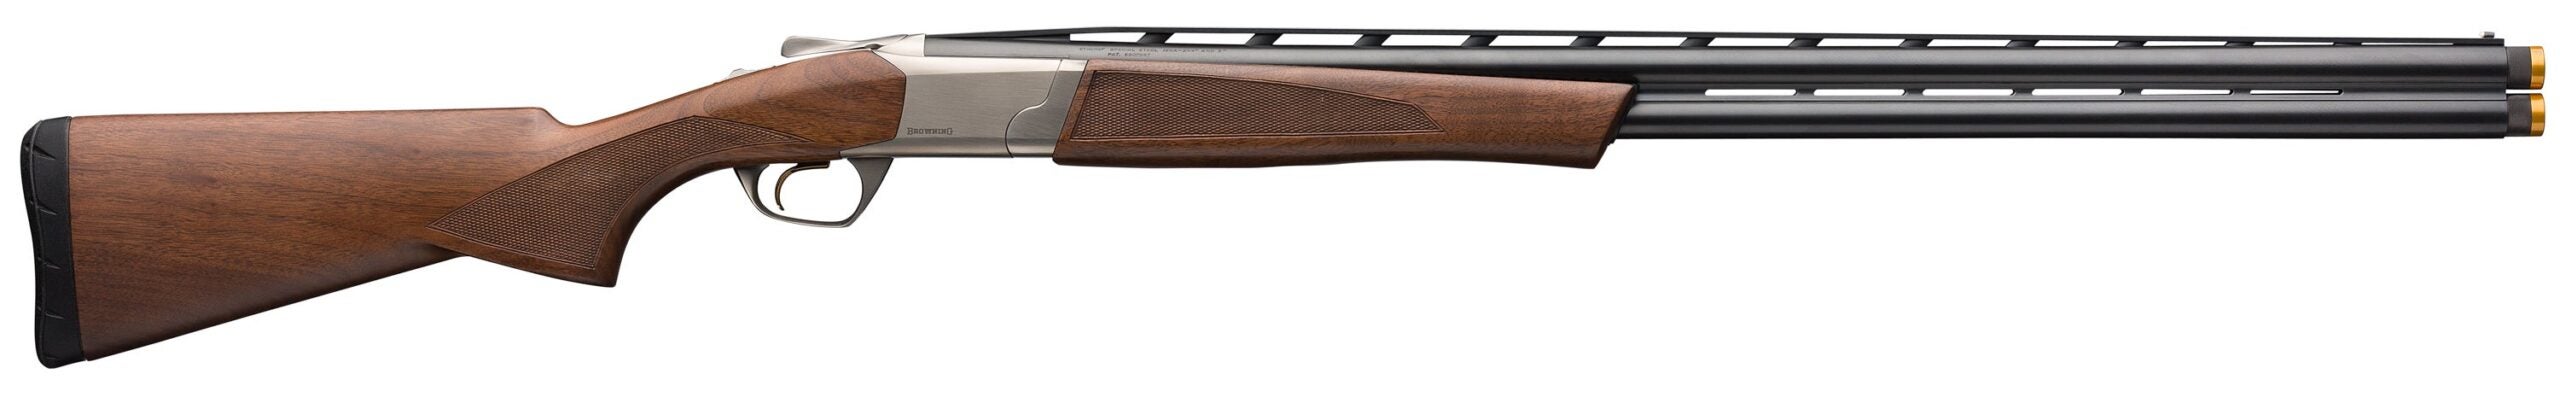 The Browning Cynergy CX.